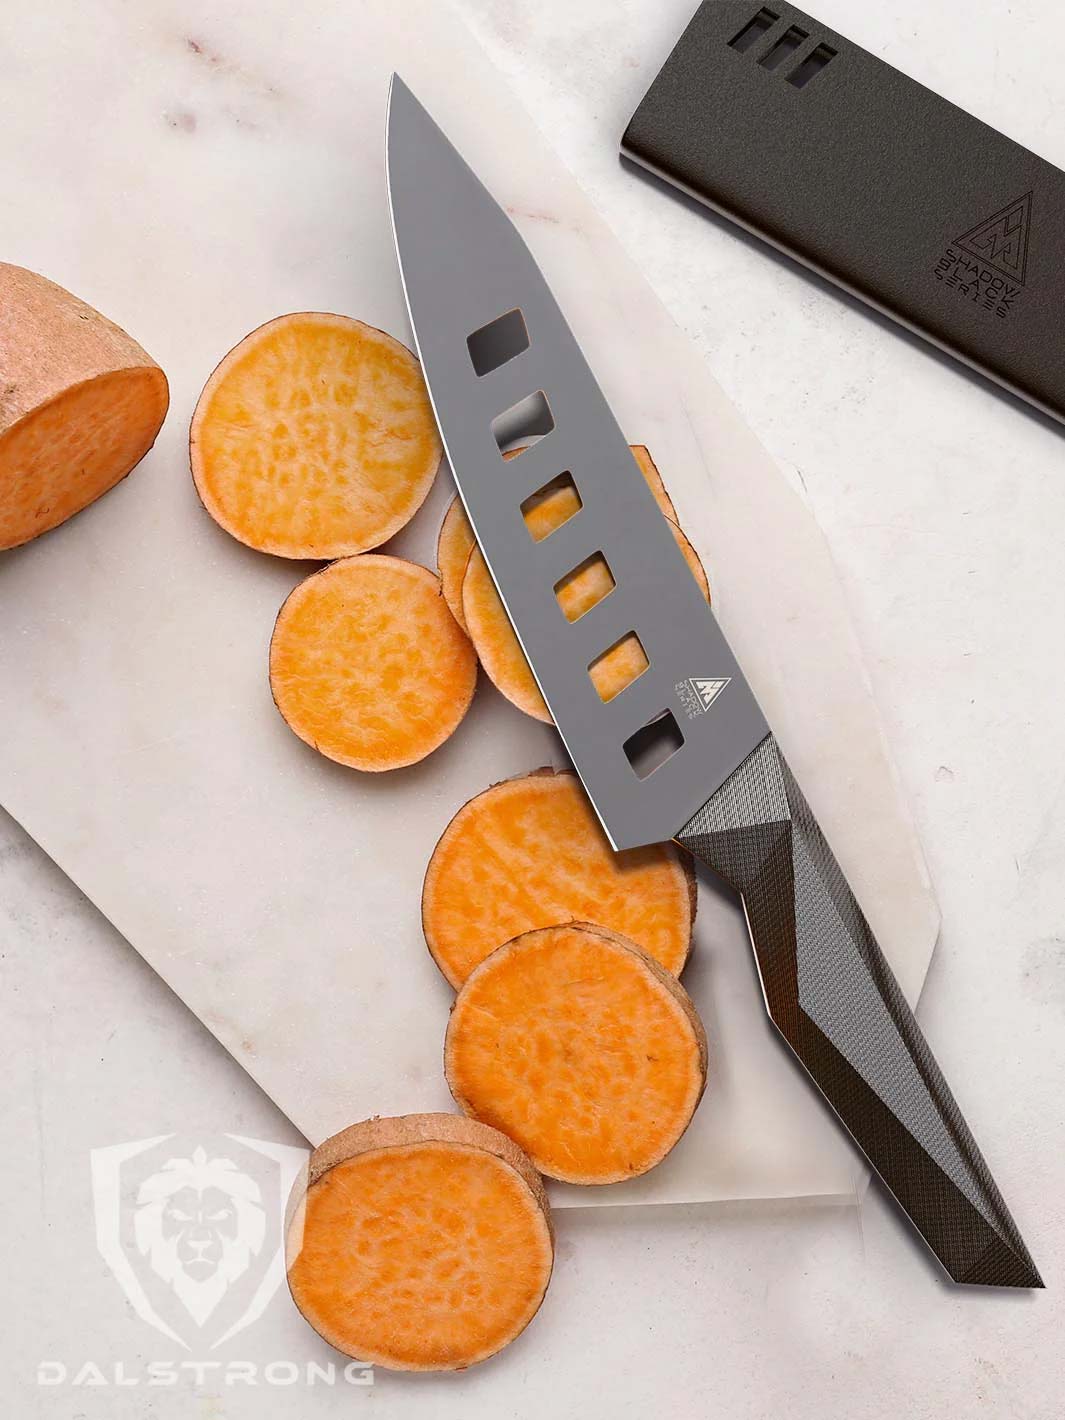 Dalstrong shadow black series 7 inch vegetable knife and black sheath beside slices of sweet potatoes.